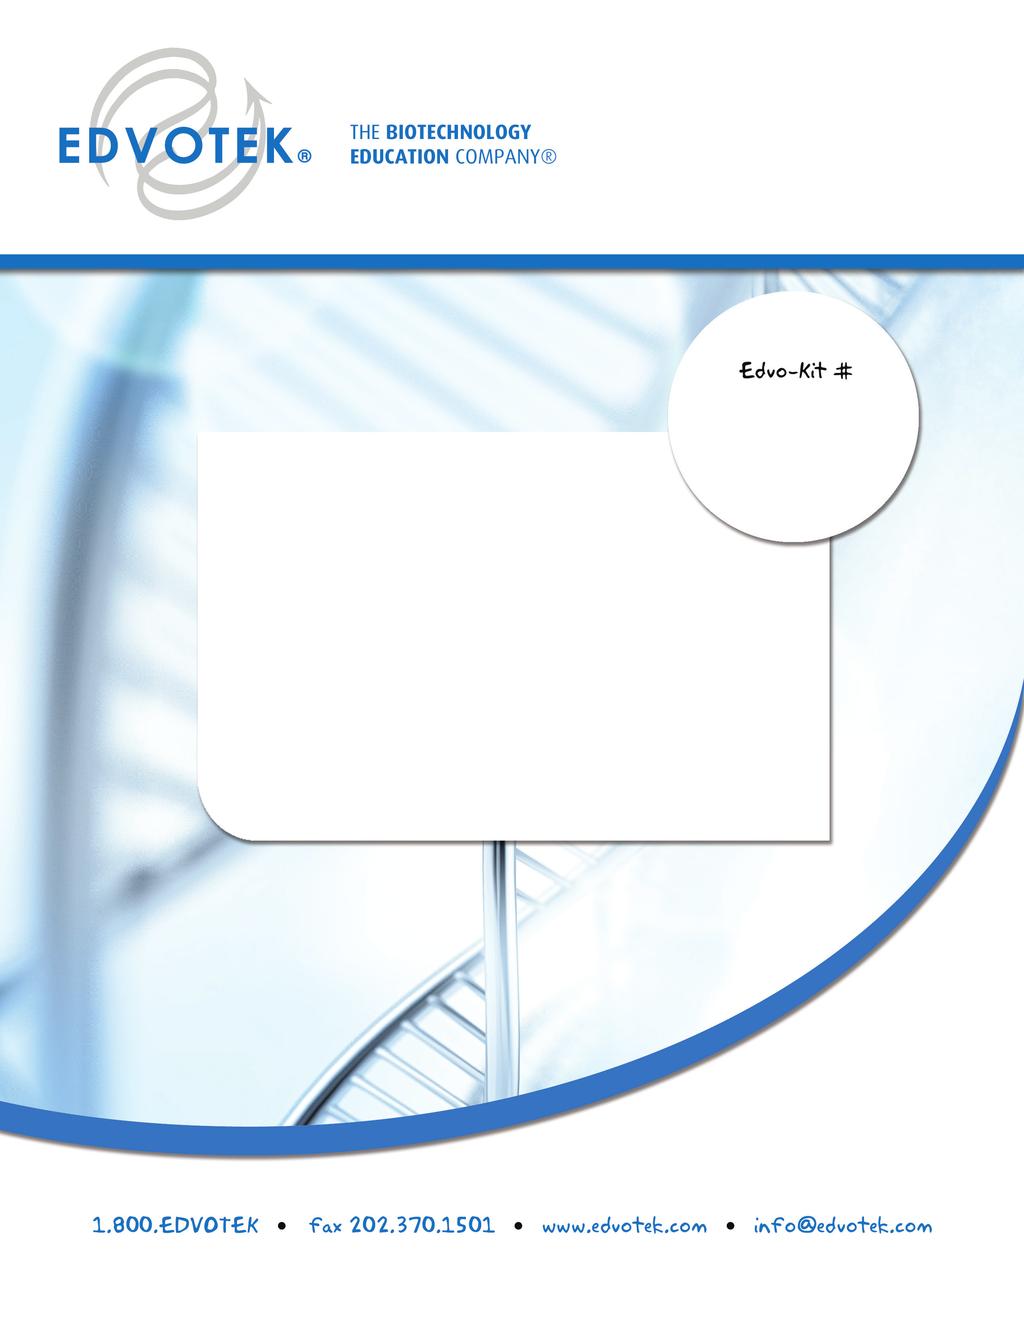 REVISED & UPDATED Edvo-Kit #333 Alu-Human DNA Typing Using PCR Experiment Objective: In this experiment, students will extract their own genomic DNA.